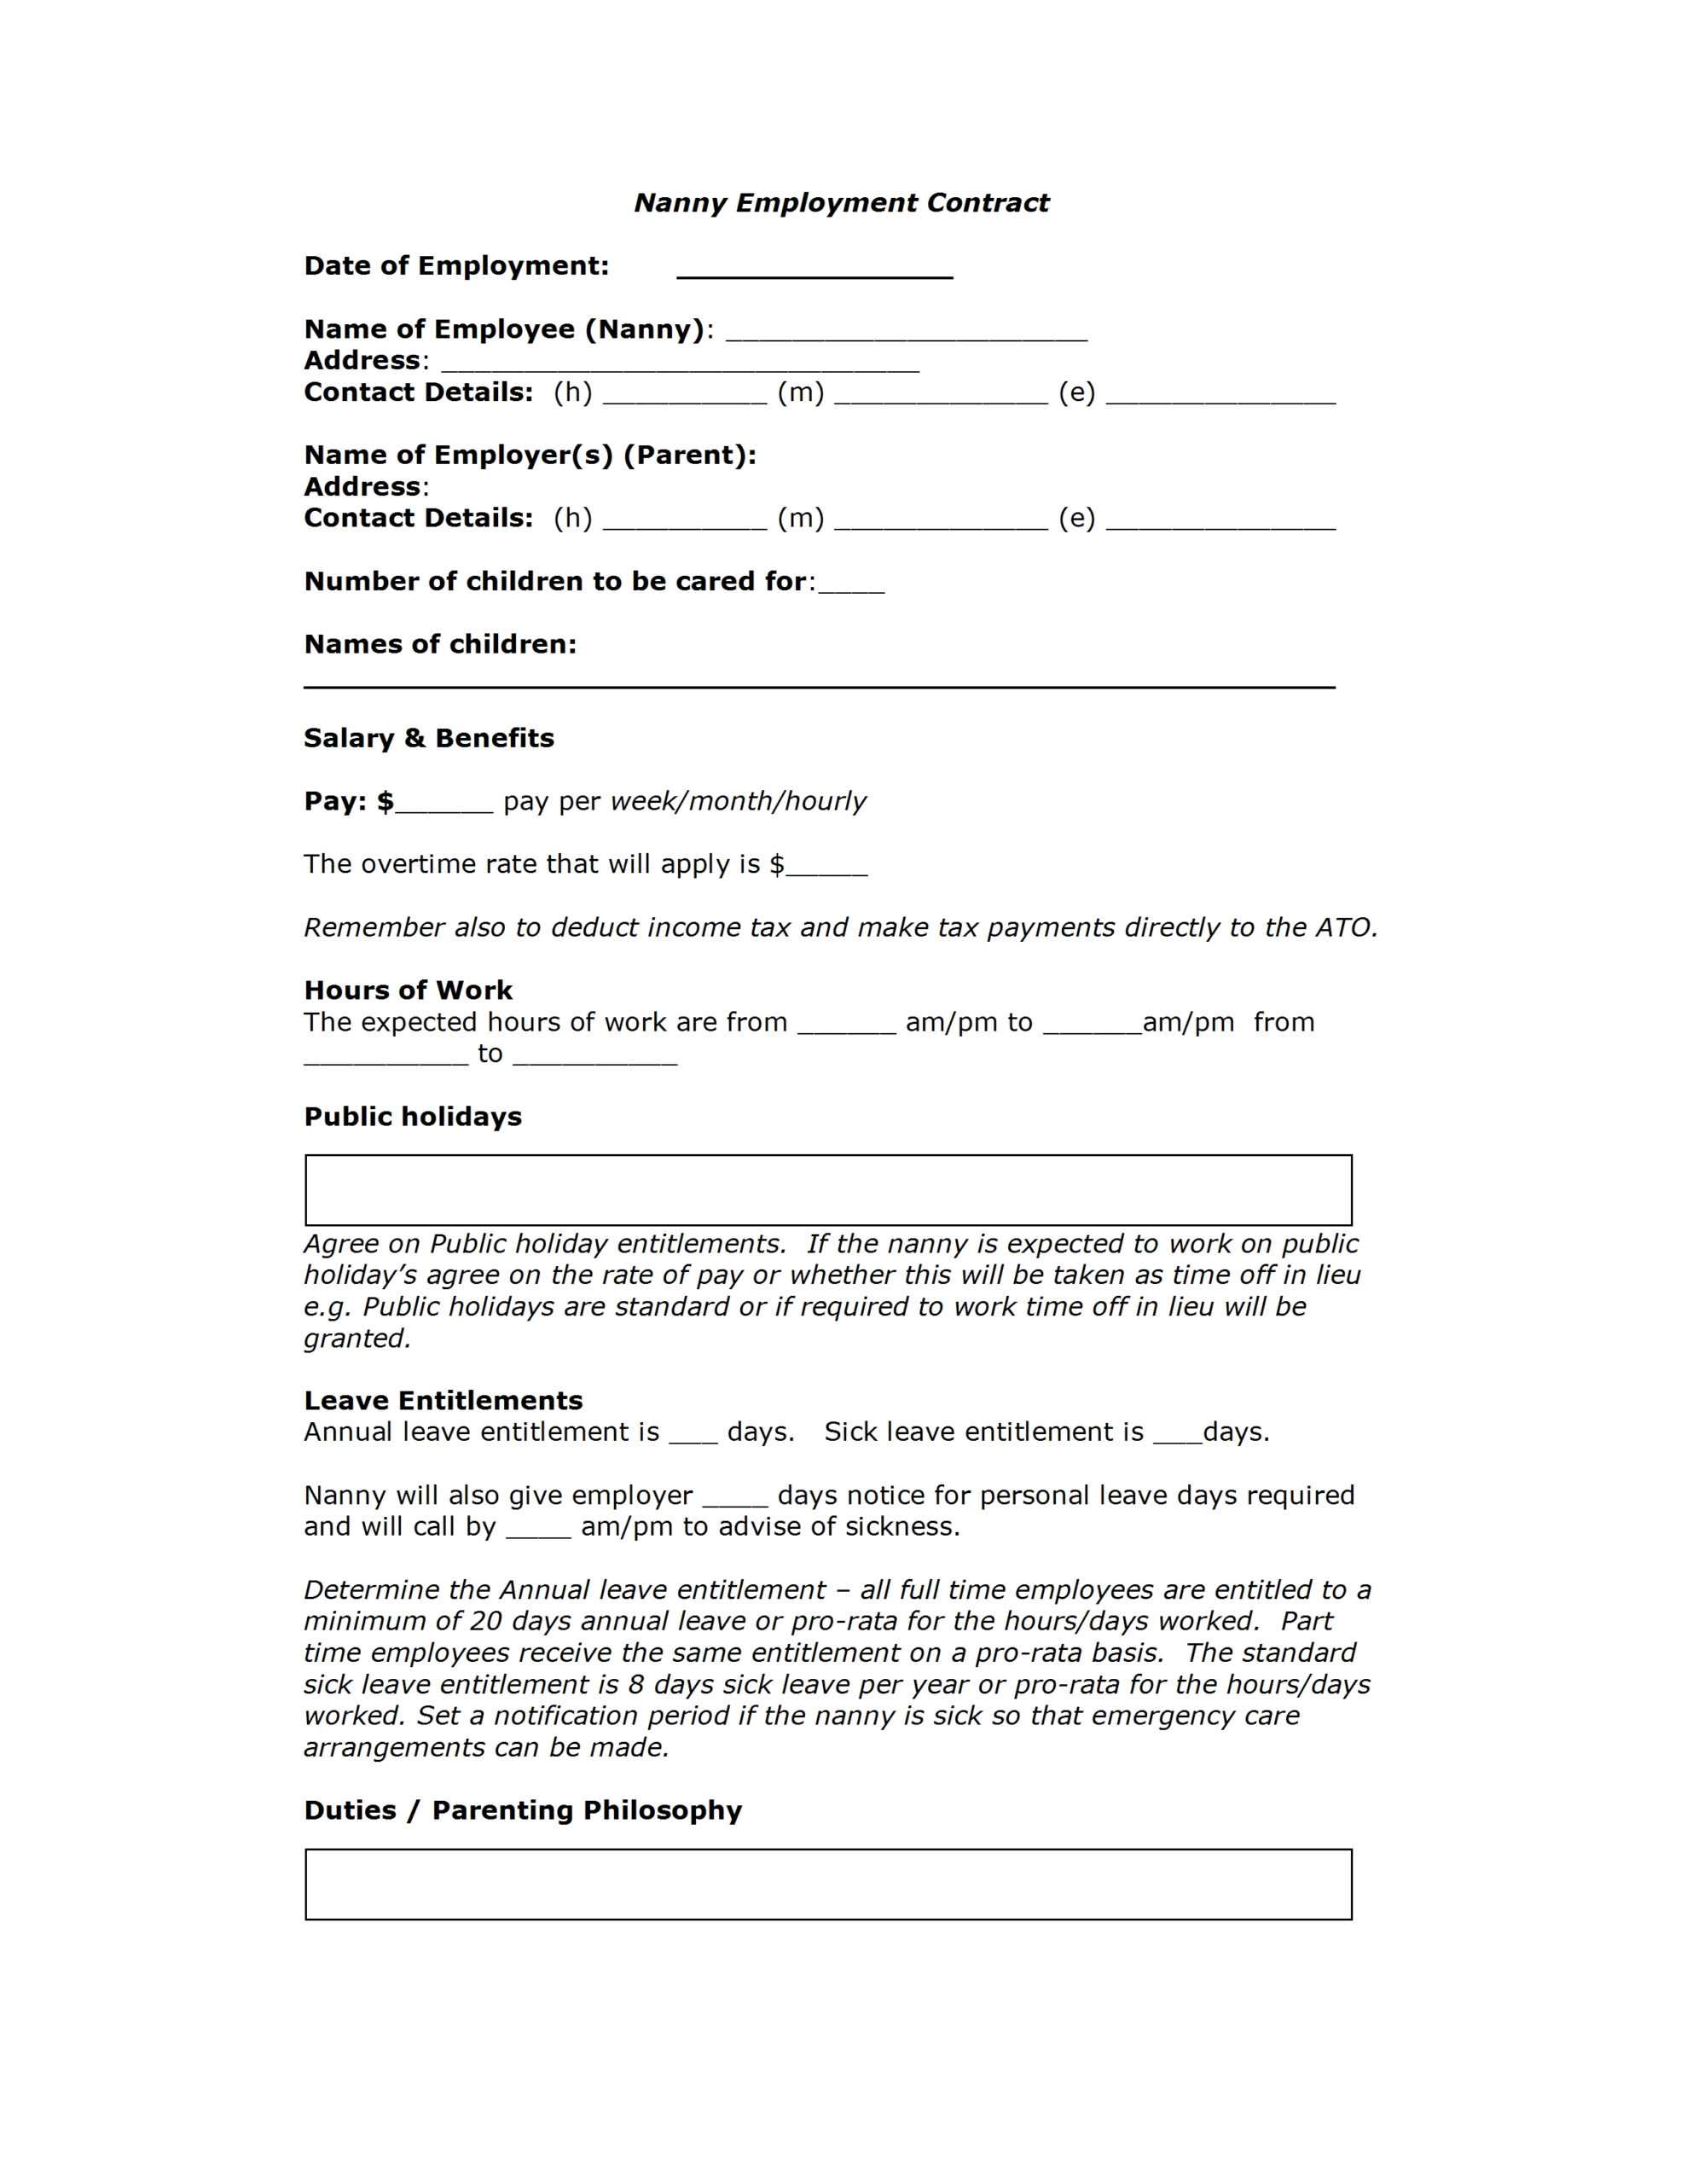 Contract Template For Nanny | Professional Resume Cv Maker Within Nanny Contract Template Word